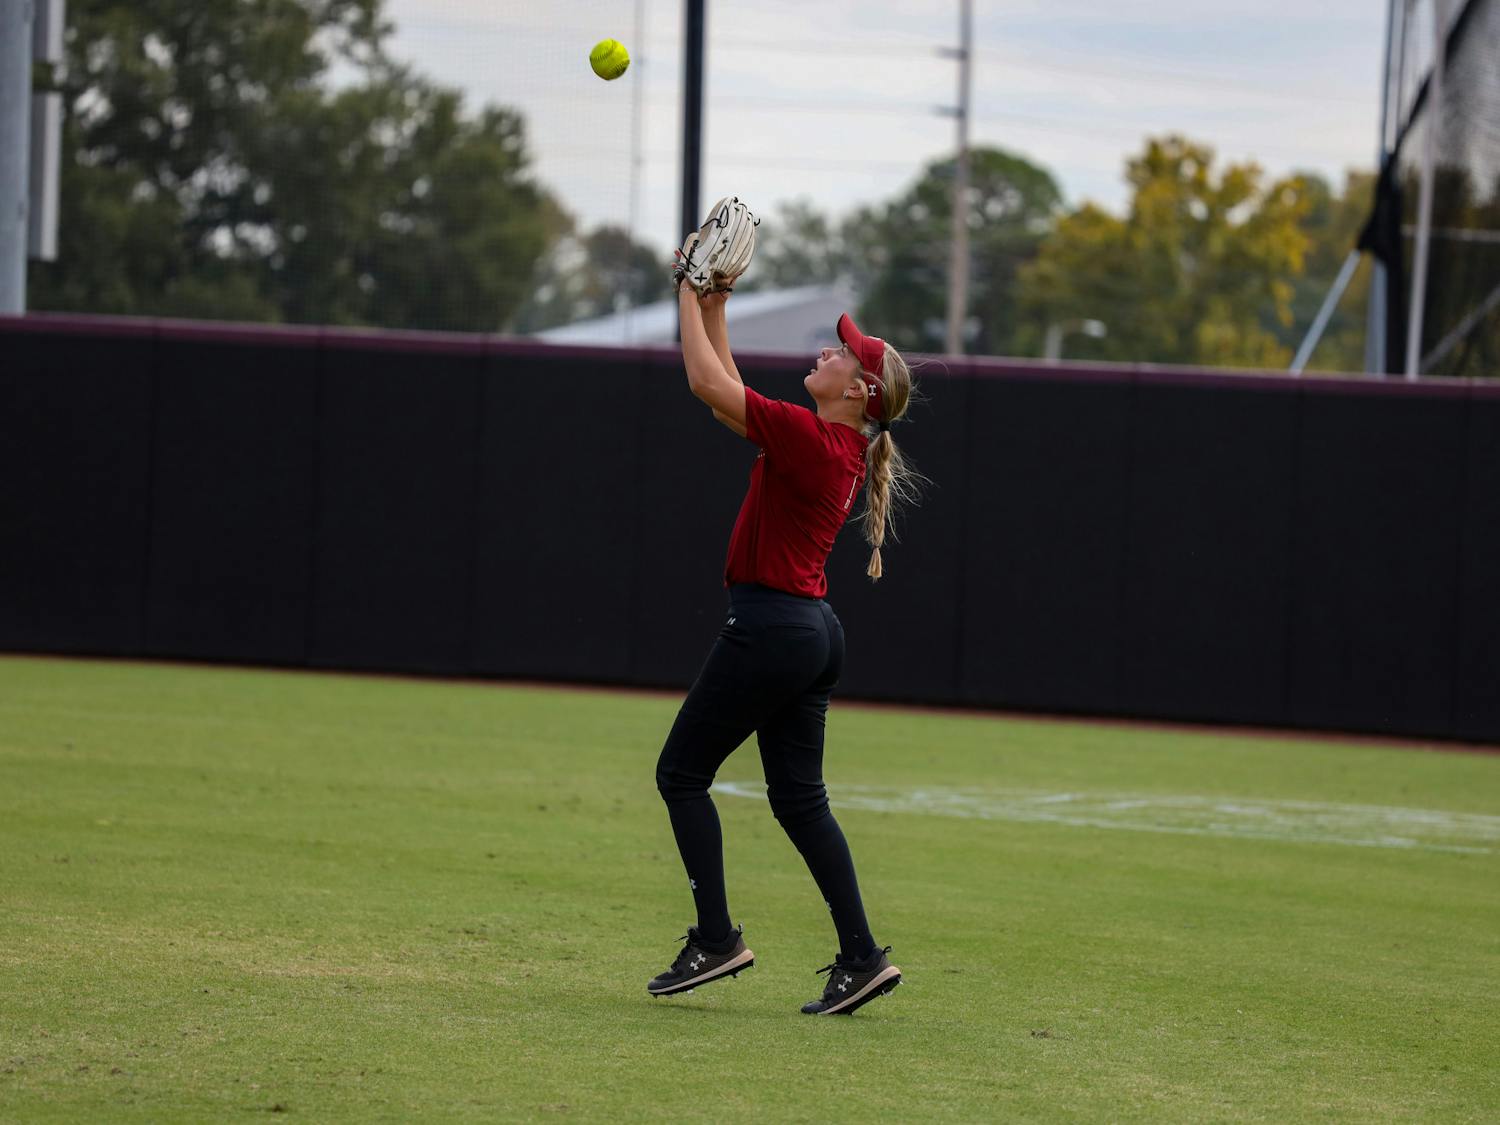 Freshman outfielder Caydra Parker catches the ball for an out during the exhibition game against USC Aiken at Beckham Field on Oct. 9, 2022. &nbsp;The Gamecocks defeated the Pacers 7-0.&nbsp;